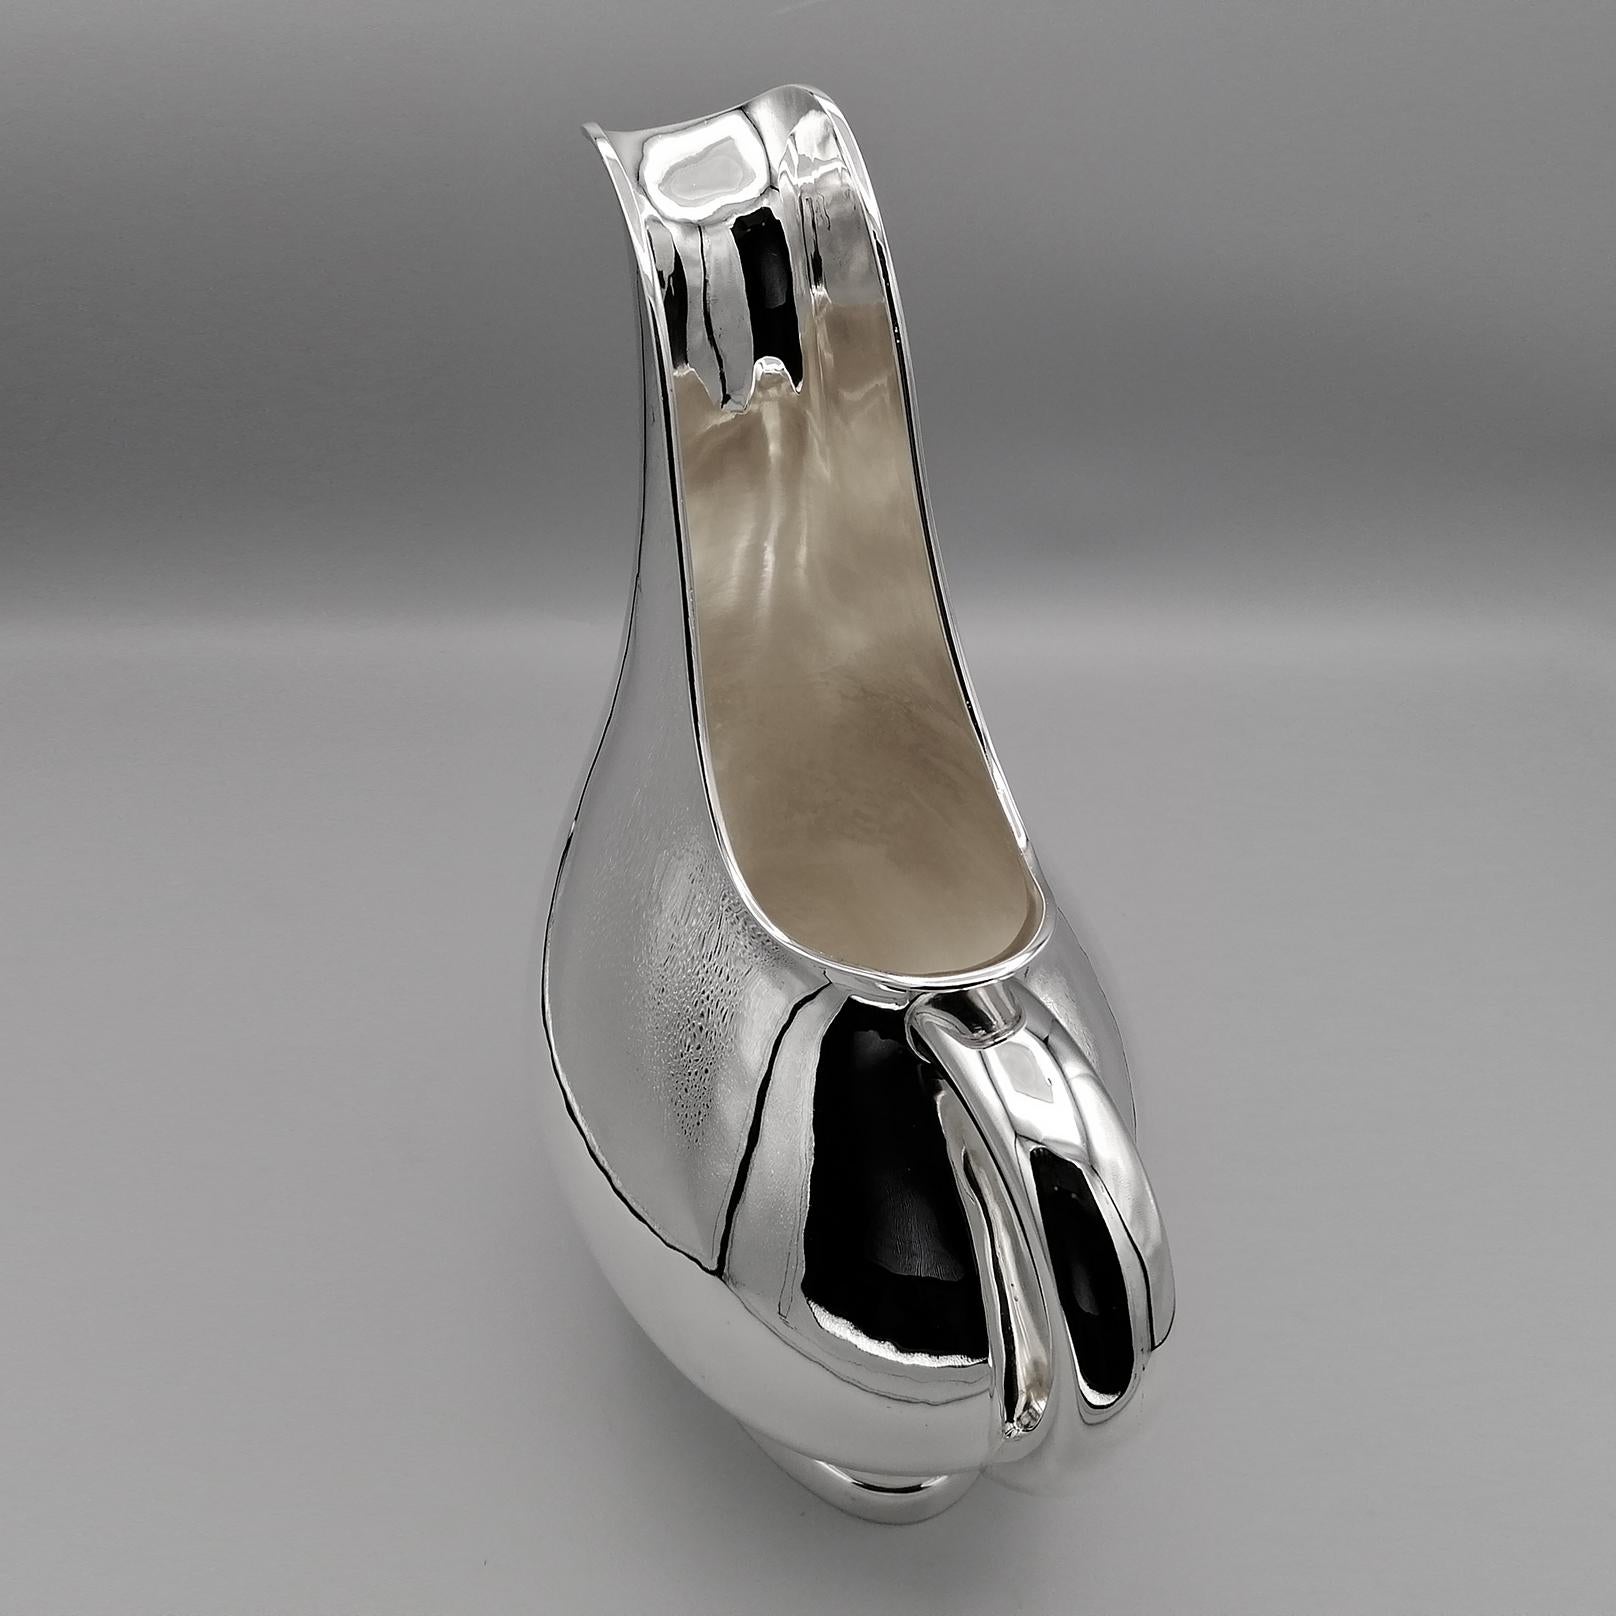 20th Century Italian Modern Solid Silver Jug Pitcher For Sale 5